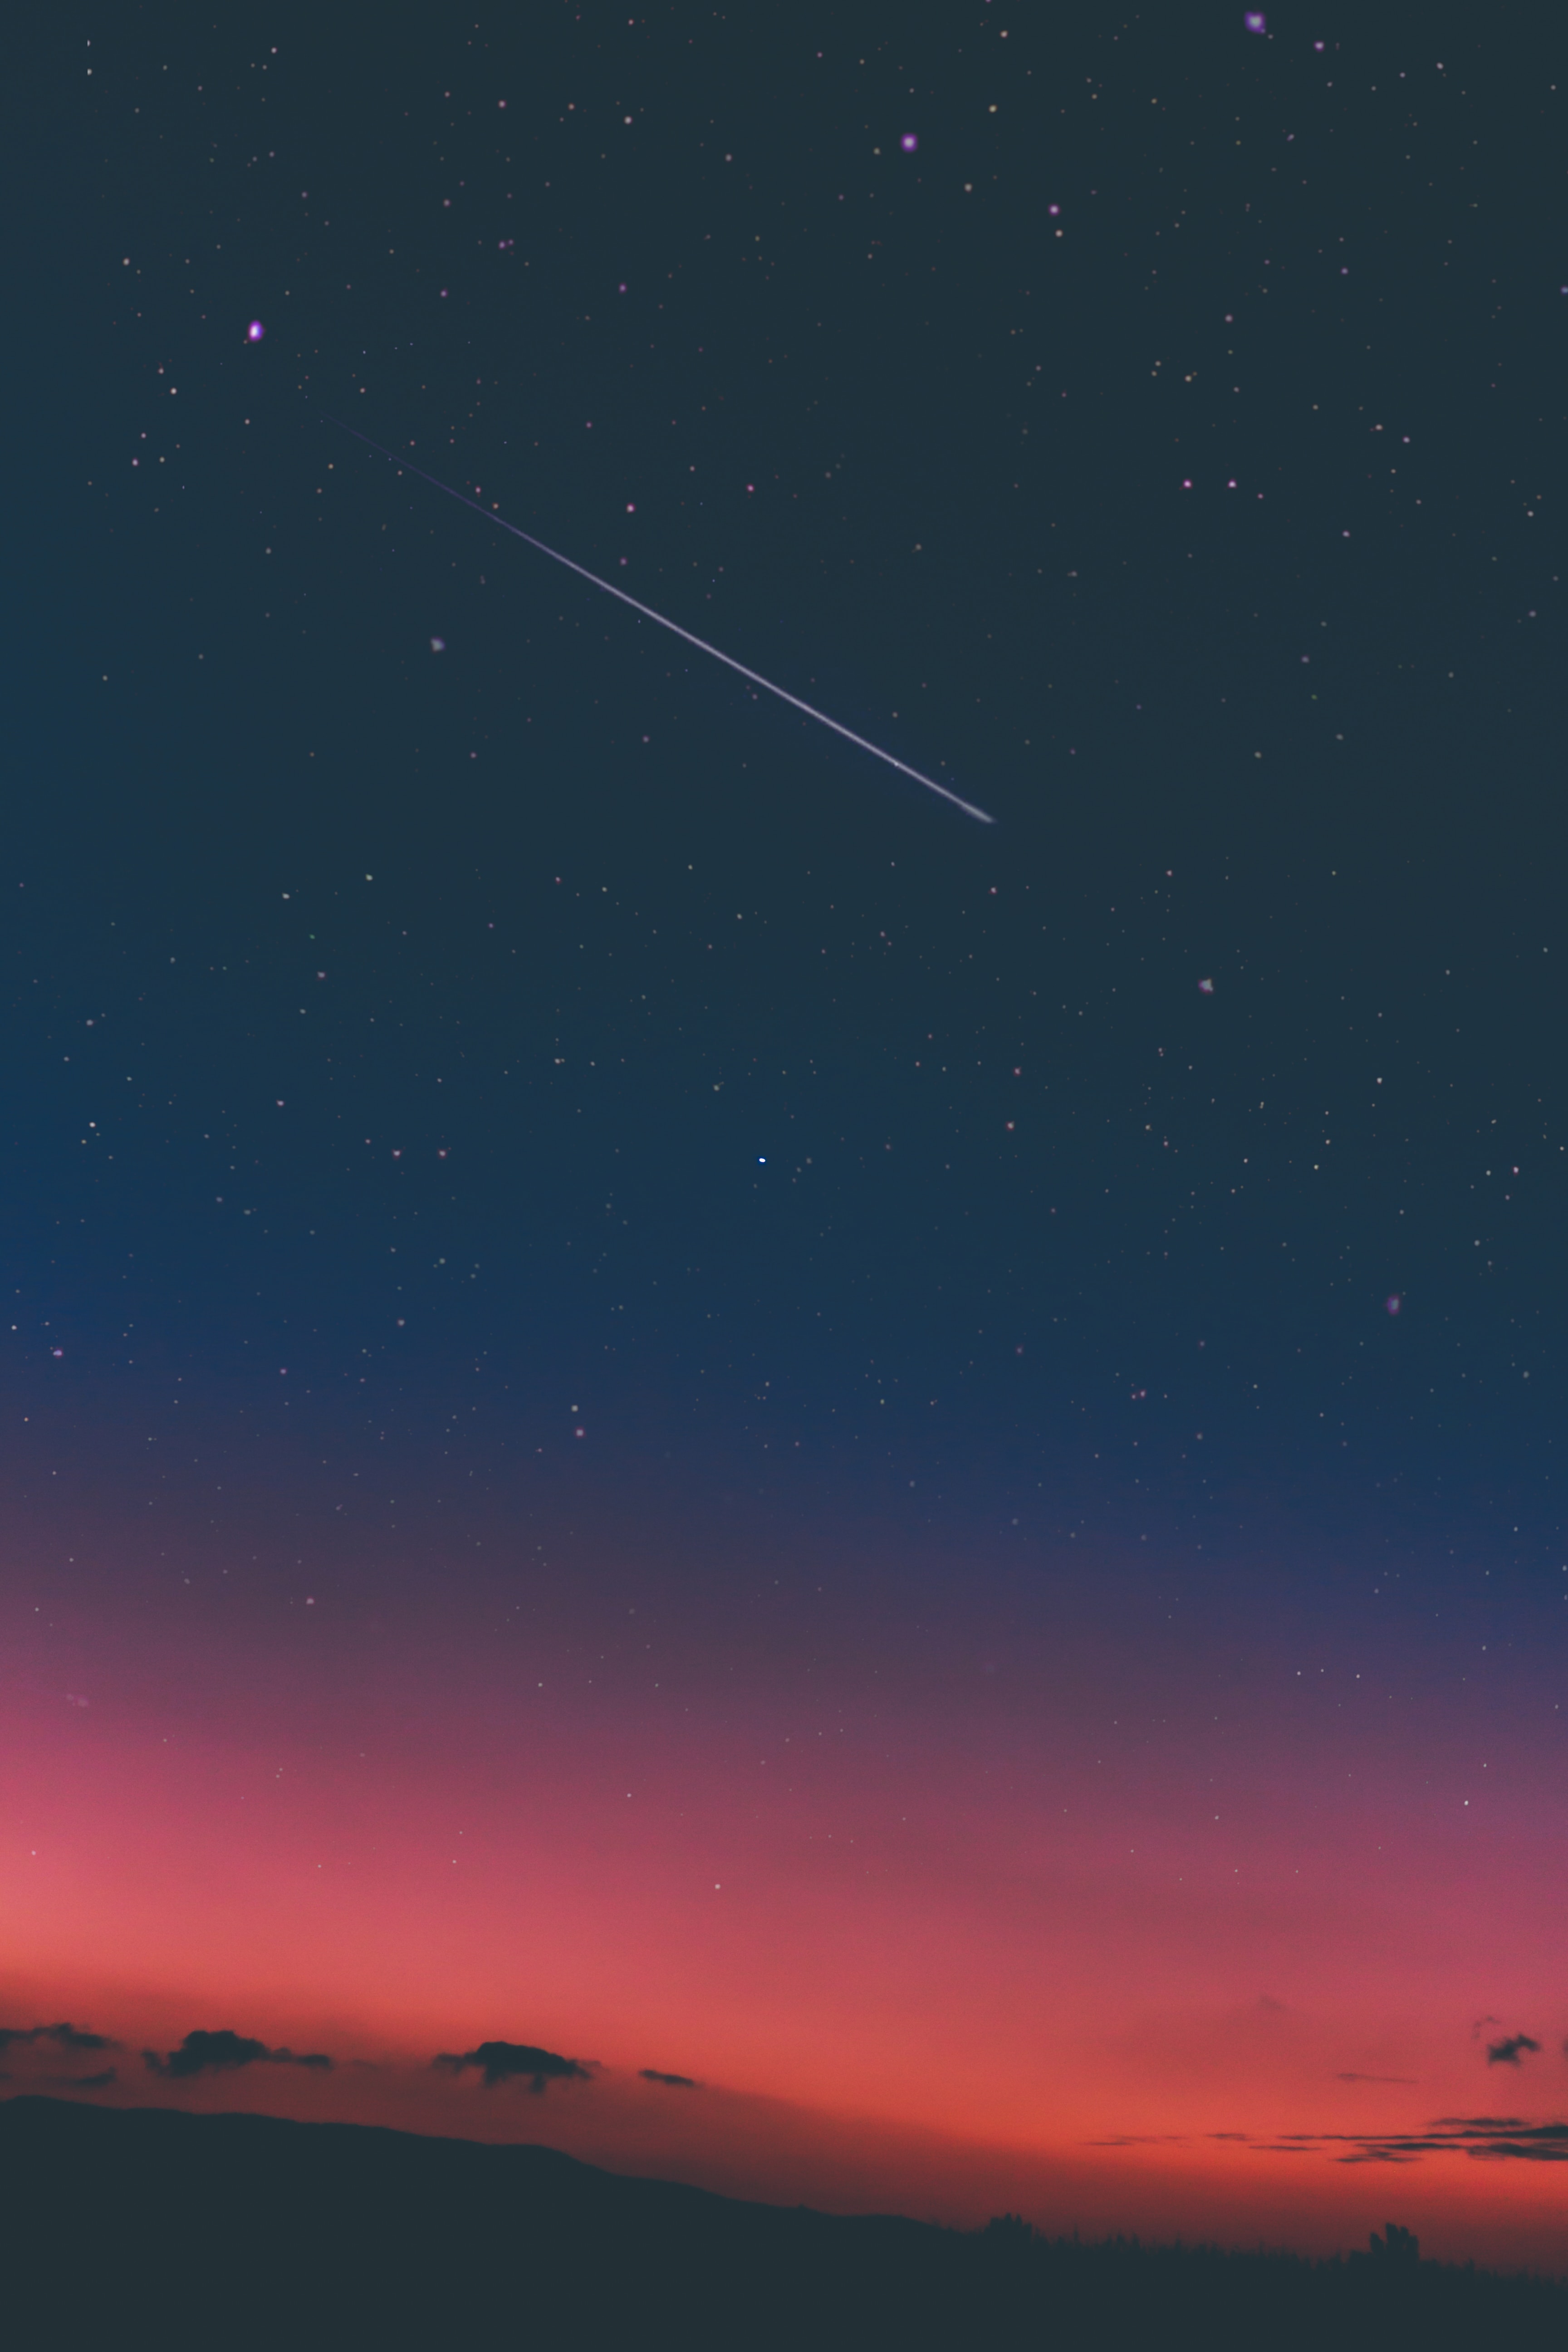 A photo of a dark sky filled with stars and a shooting star streaking through the middle of the photo.